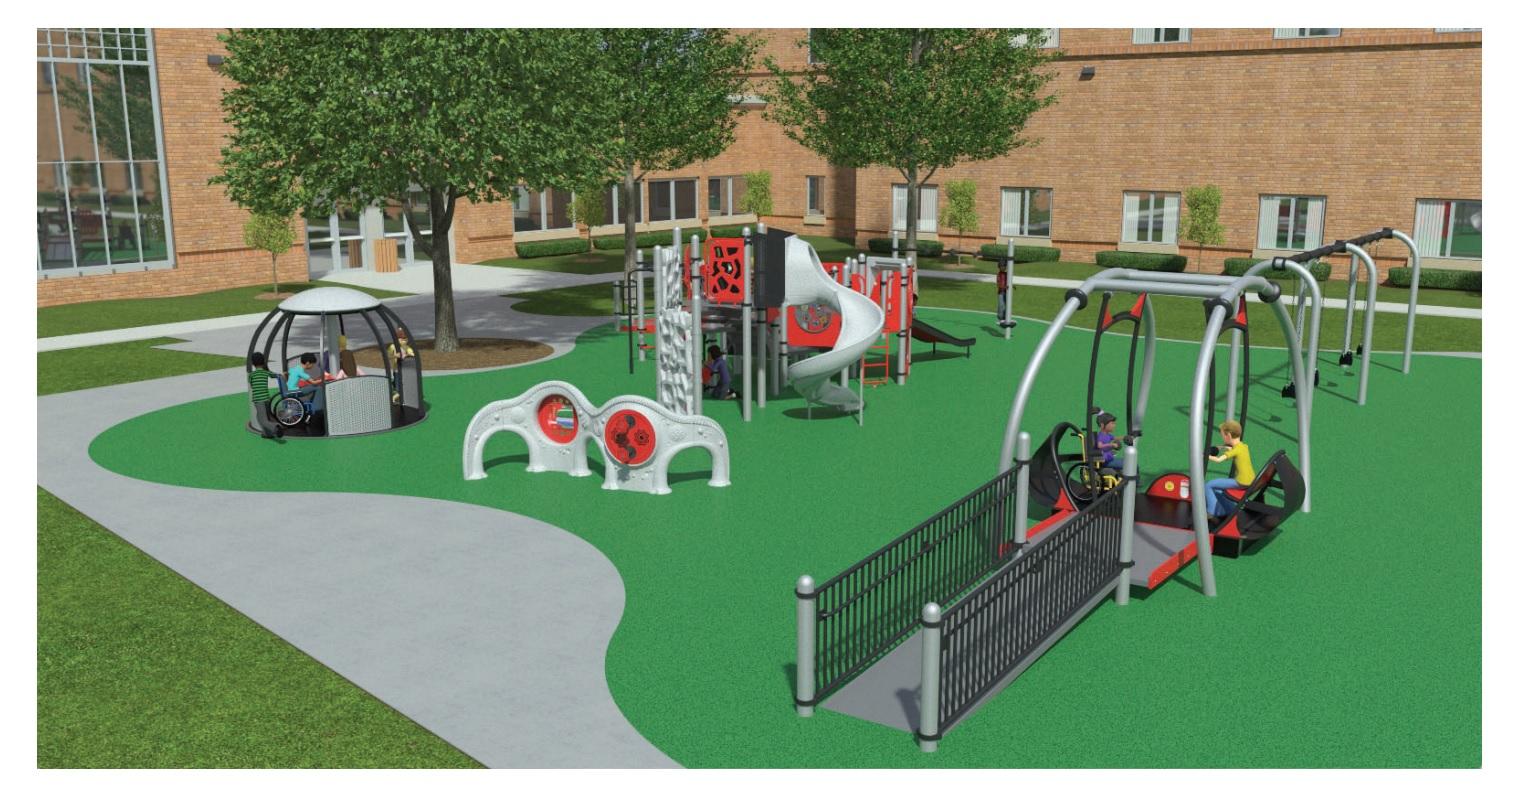 Rendering of an accessible playground with swings, slides, merry-go-round, climber, playcenter, sensory cente